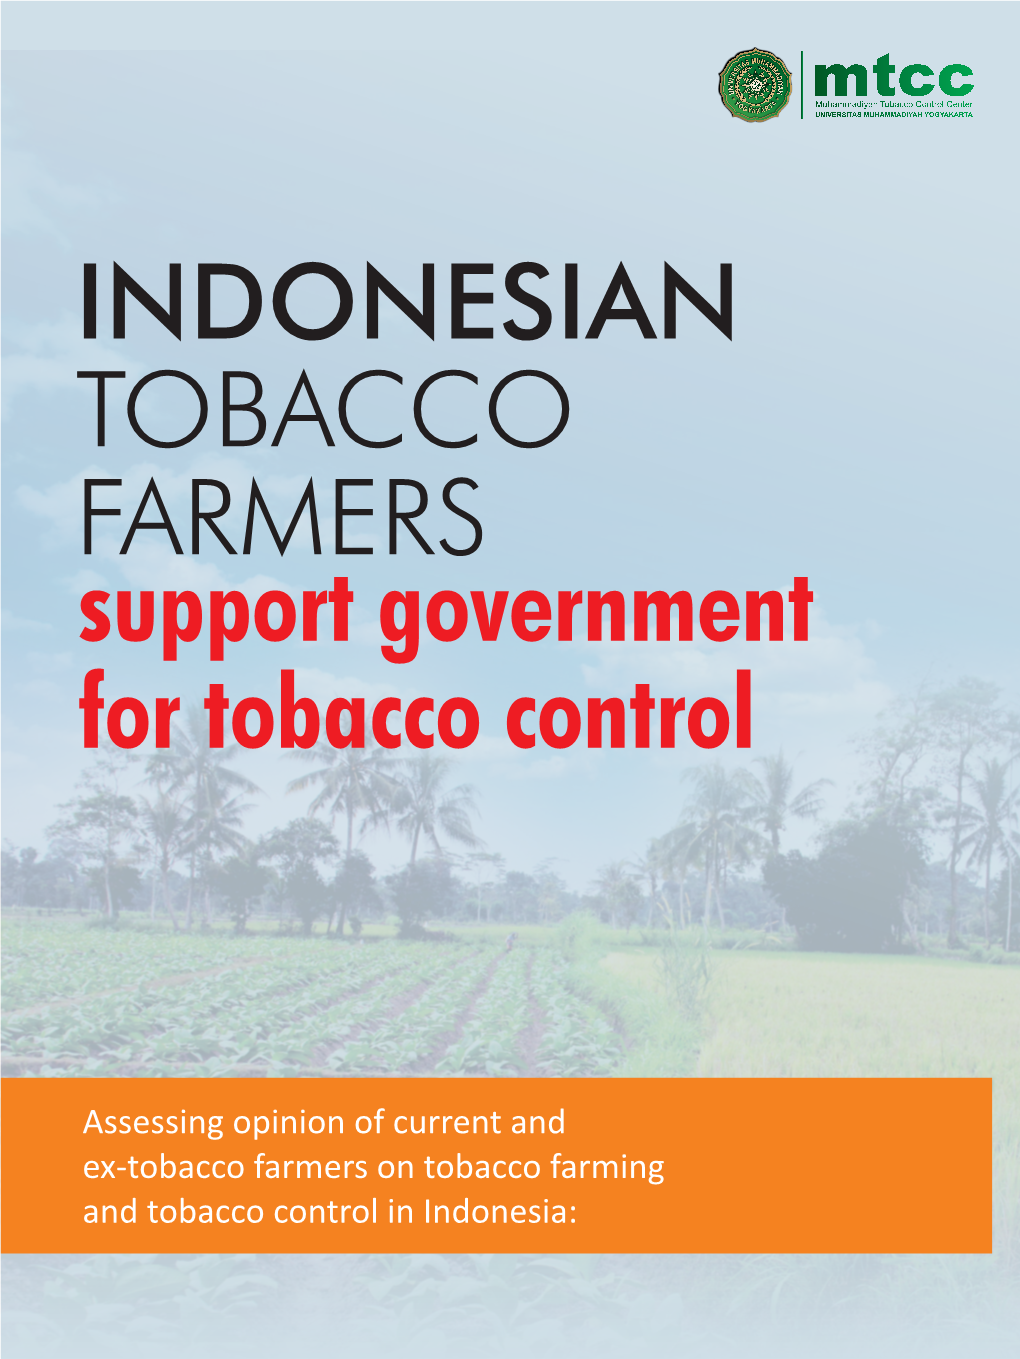 INDONESIAN TOBACCO FARMERS Support Government for Tobacco Control